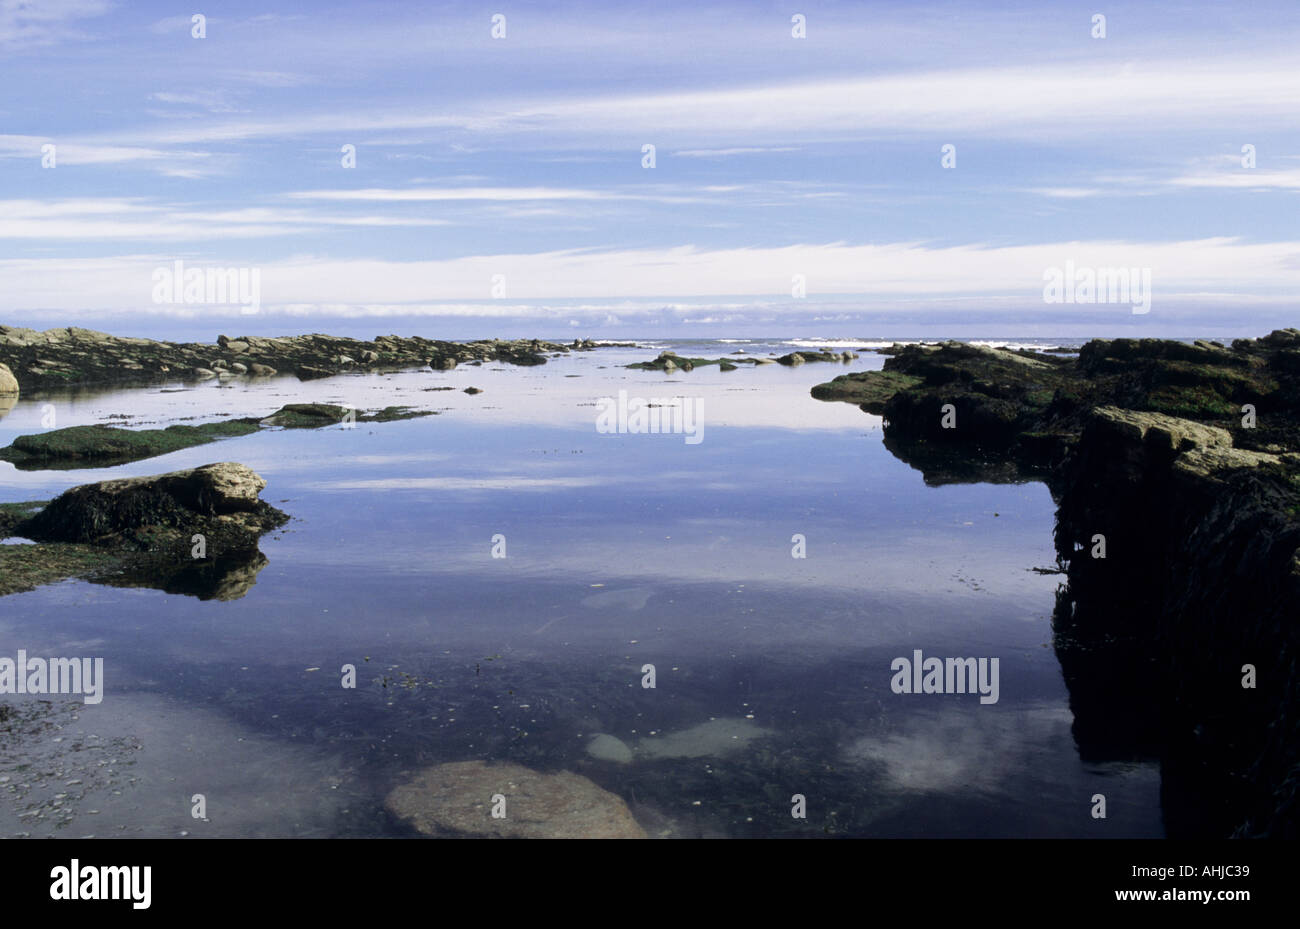 Blue sky and white clouds reflected in glassy surface of rockpool. Submerged rocks and algae in foreground. Cullercoats, Tyne and Wear, UK. Stock Photo